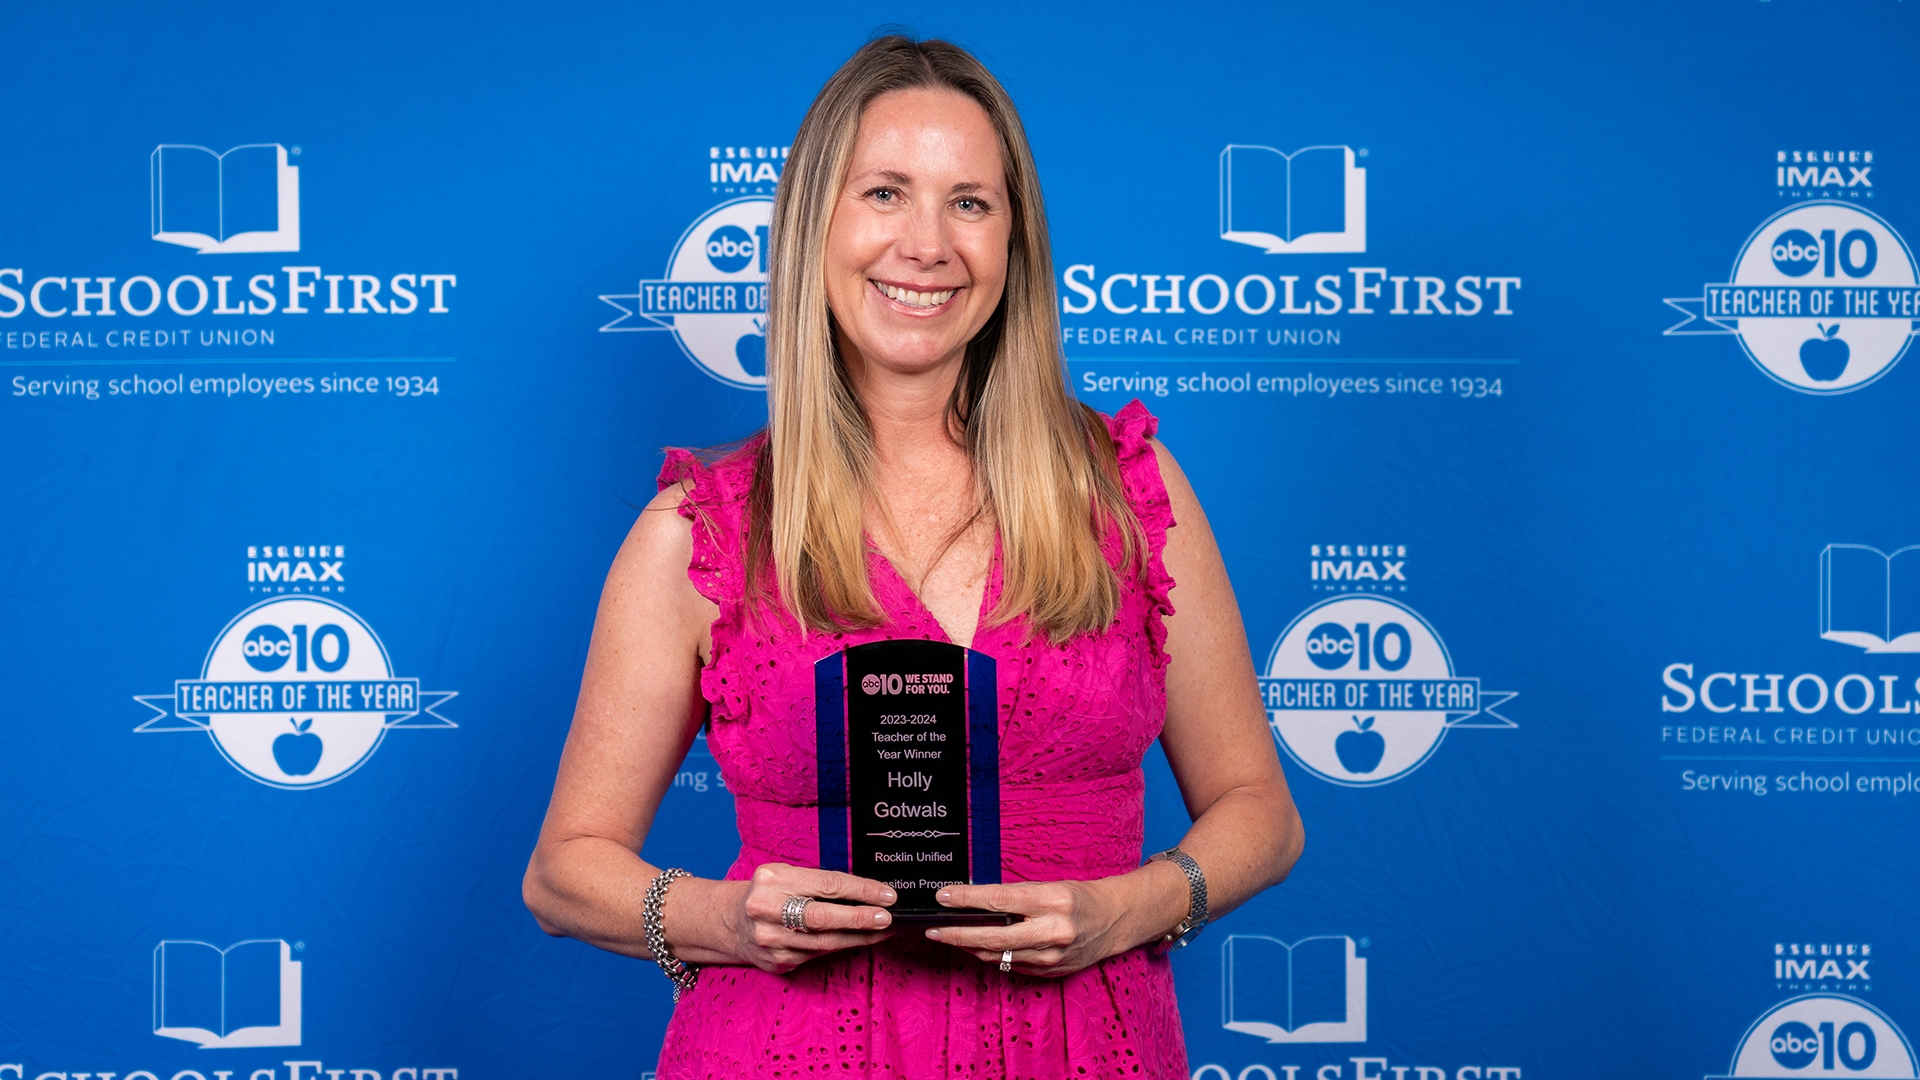 Chosen from 12 deserving monthly award recipients, Holly Gotwals was selected as the 2023/2024 Esquire IMAX Teacher of the Year.